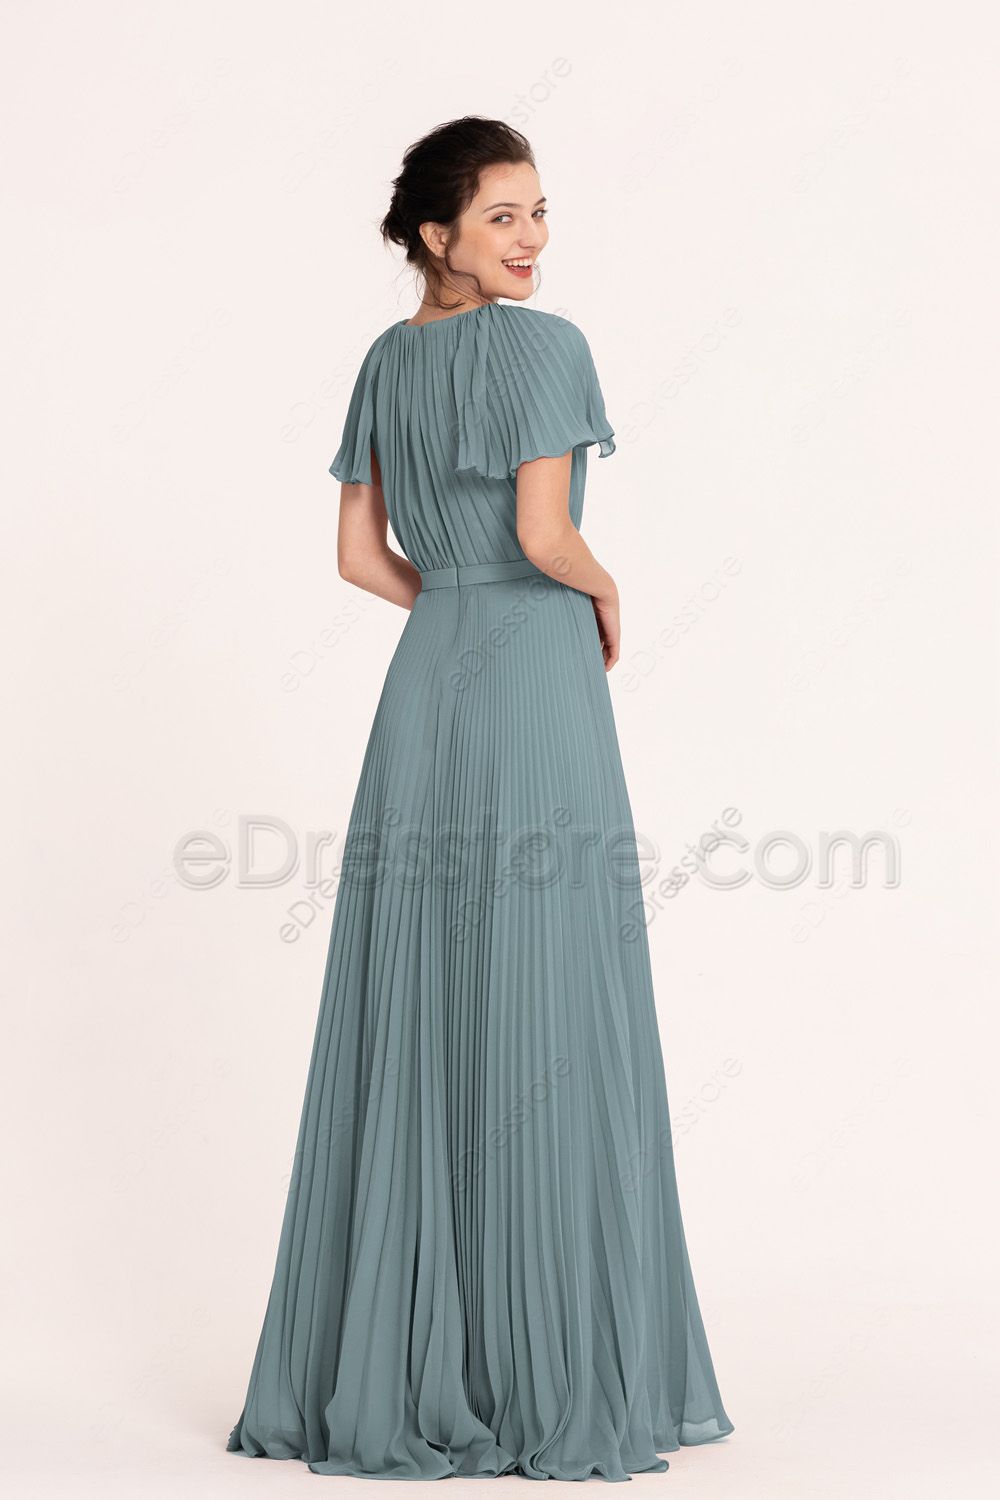 Seaglass Green Modest Mother of the Bride Dress with Sleeves | eDresstore